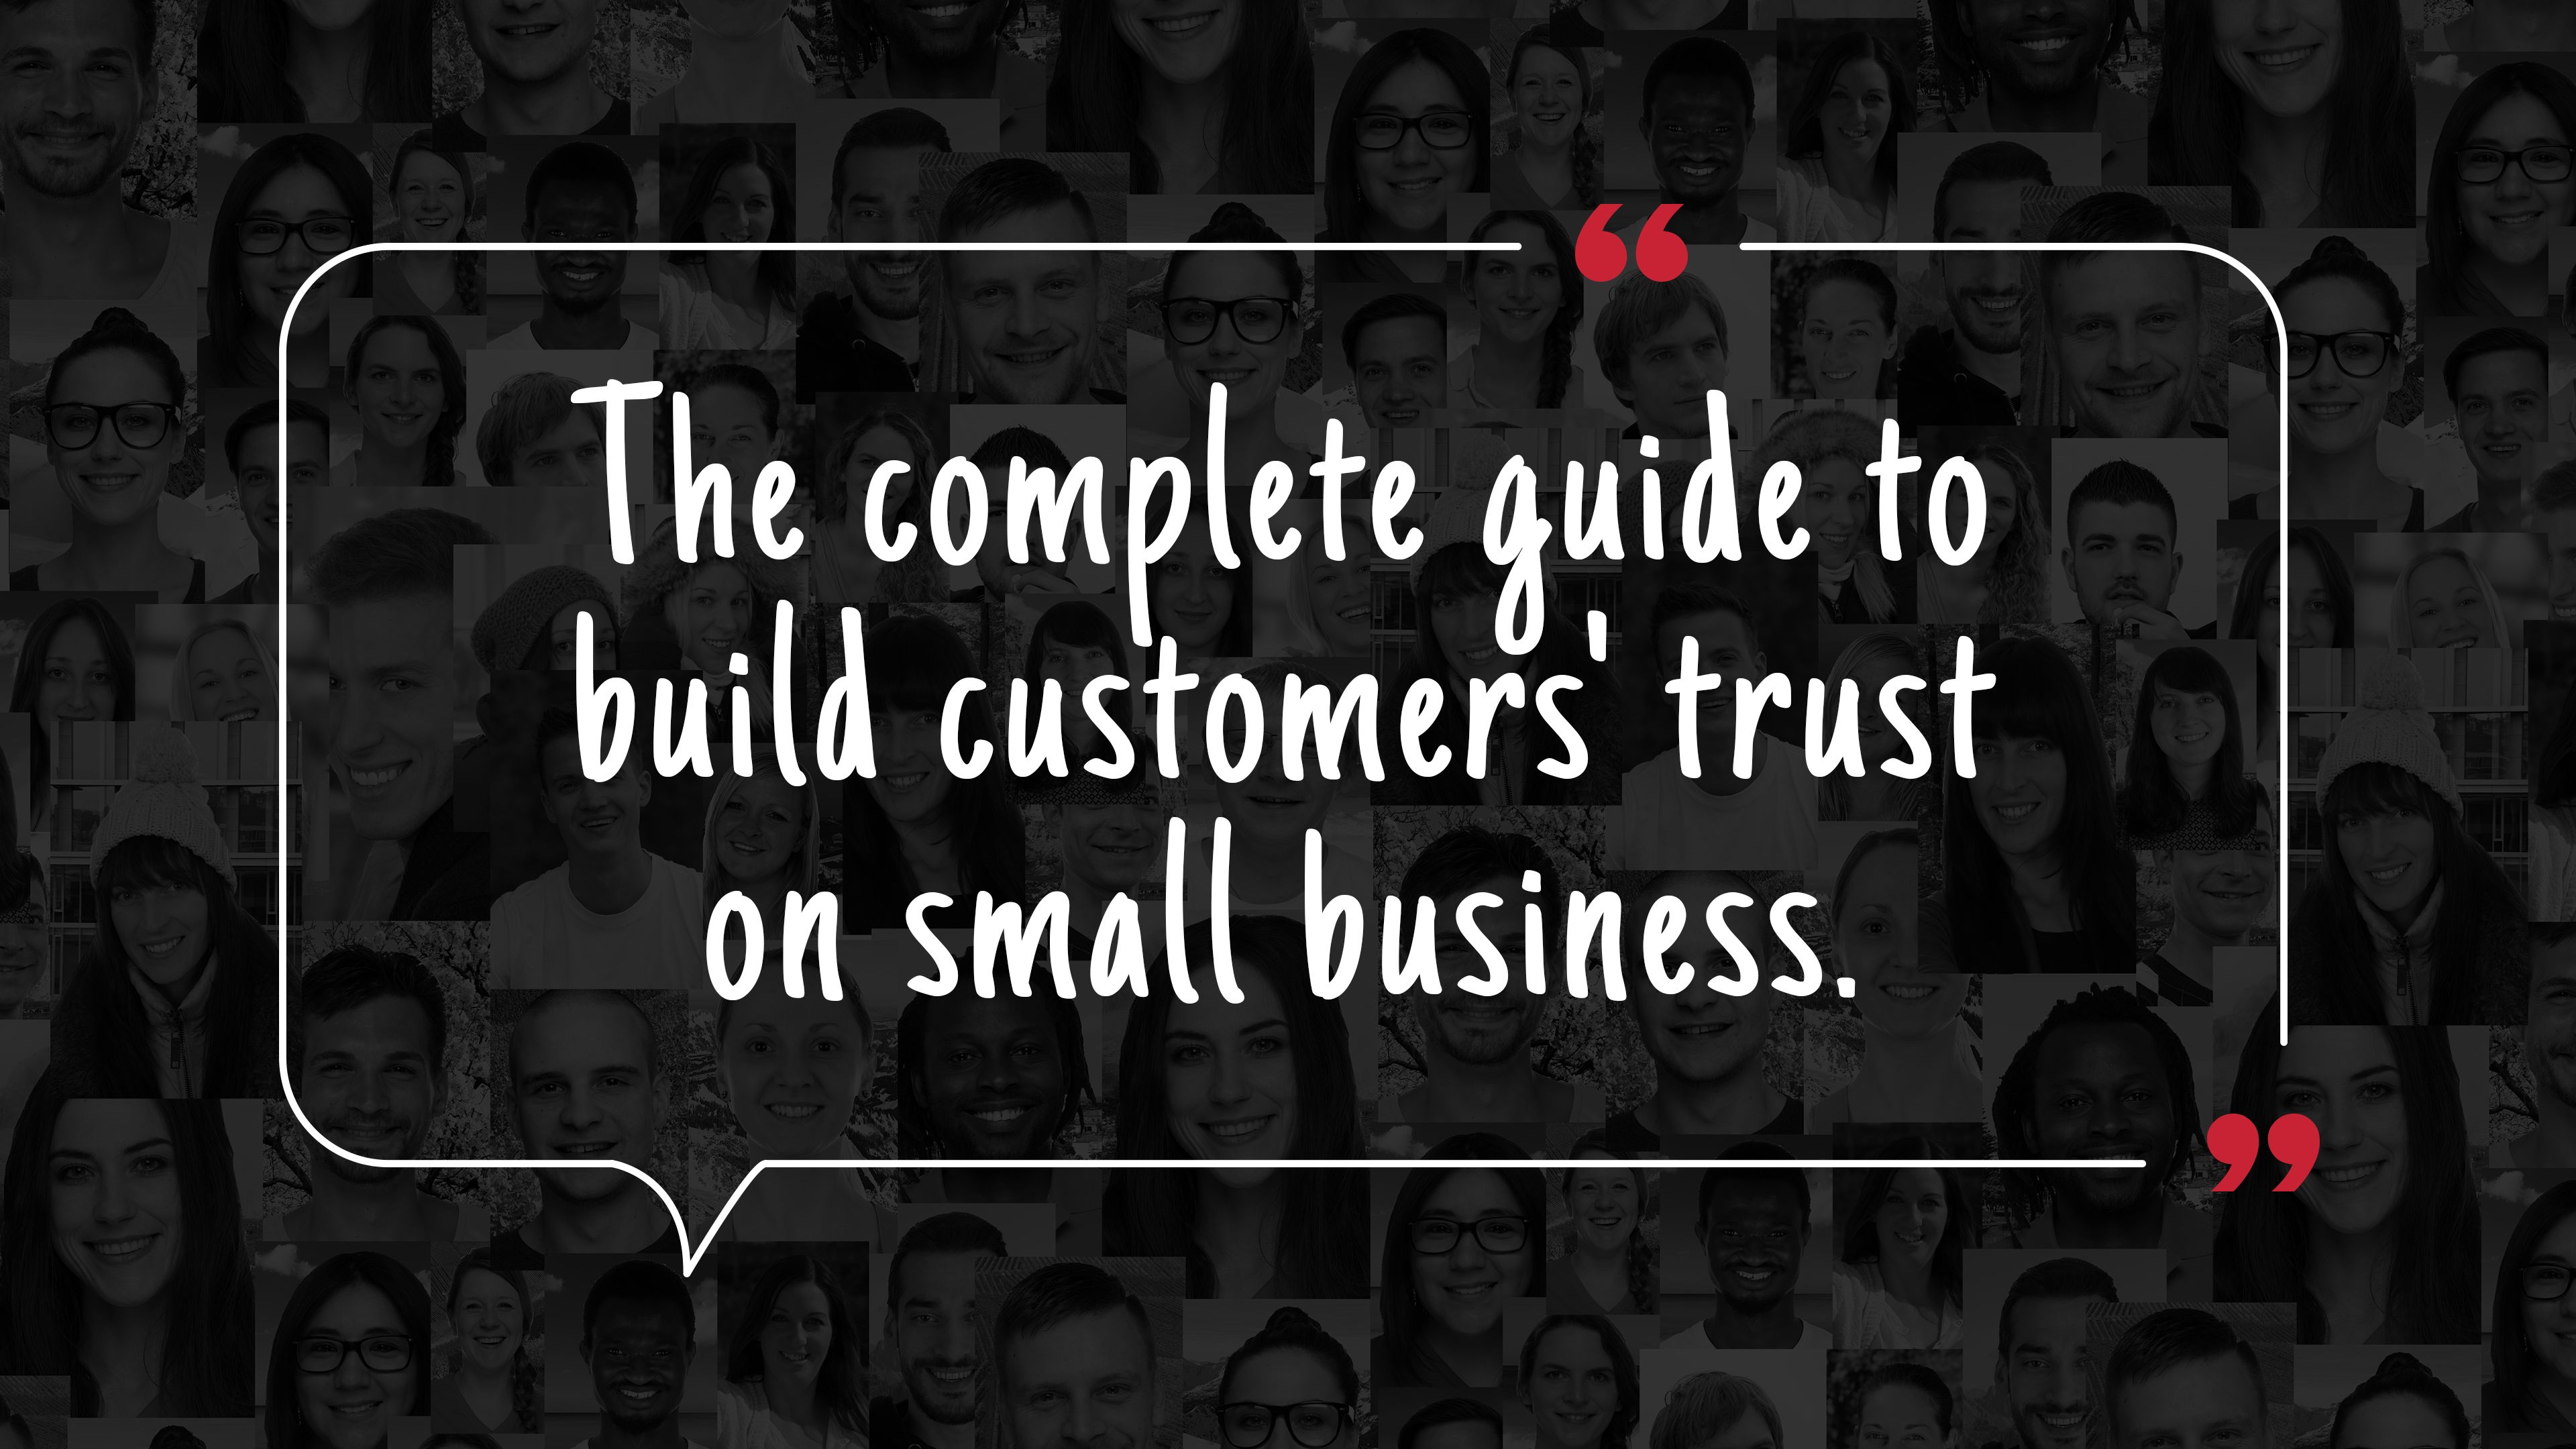 5 Ways small businesses can build customer trust using email marketing